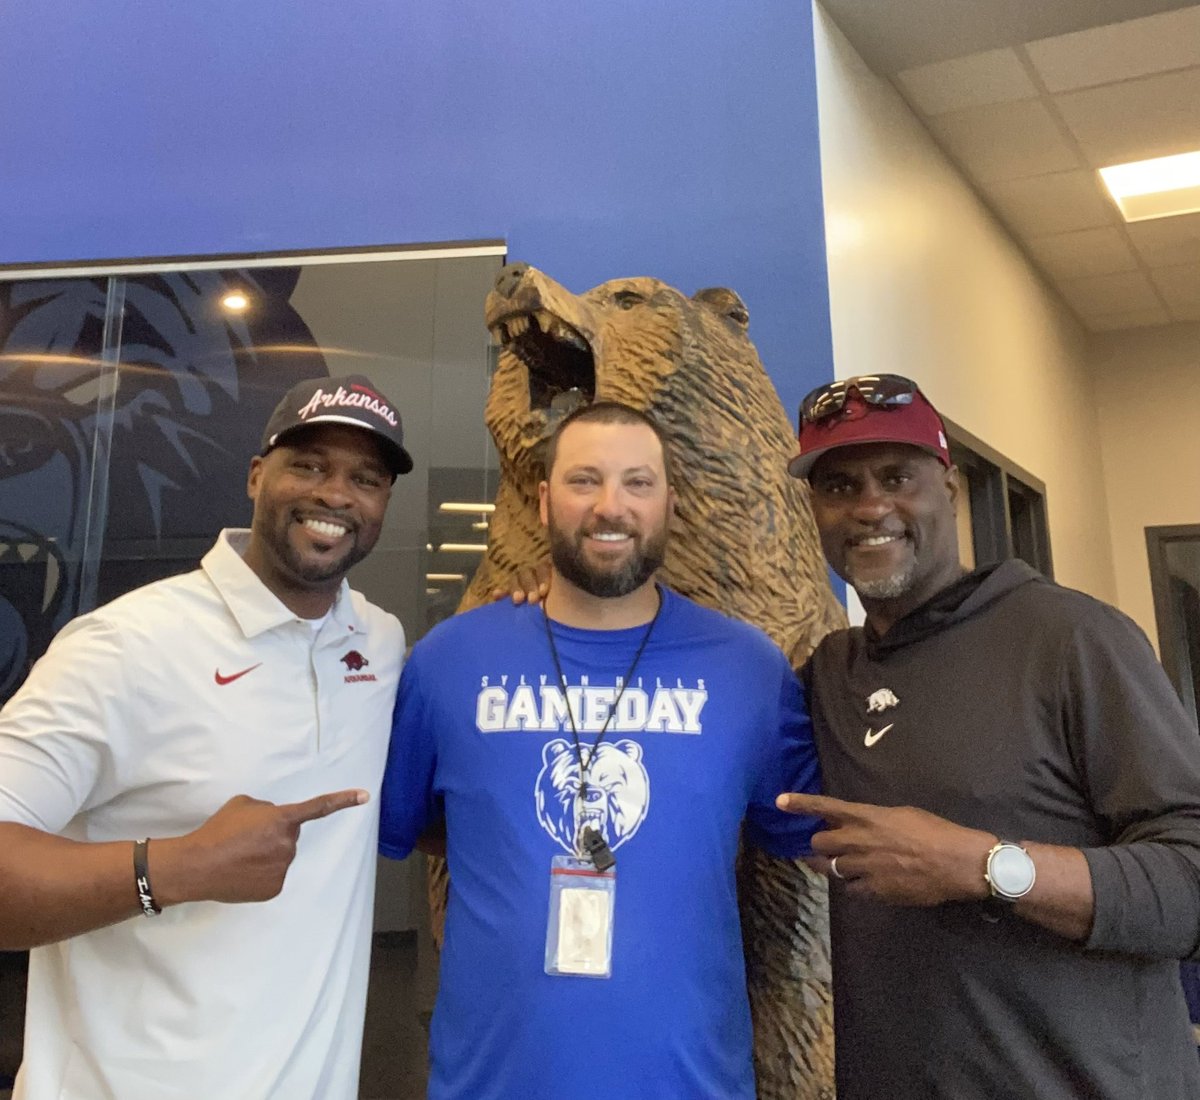 Thanks to the Hog coaches @T_WILL4REAL and Coach Woodson for stopping by Bear Country today to recruit our players! Two great guys who are the real deal! Go Hogs! Go Bears! @CoachSamPittman @RazorbackFB